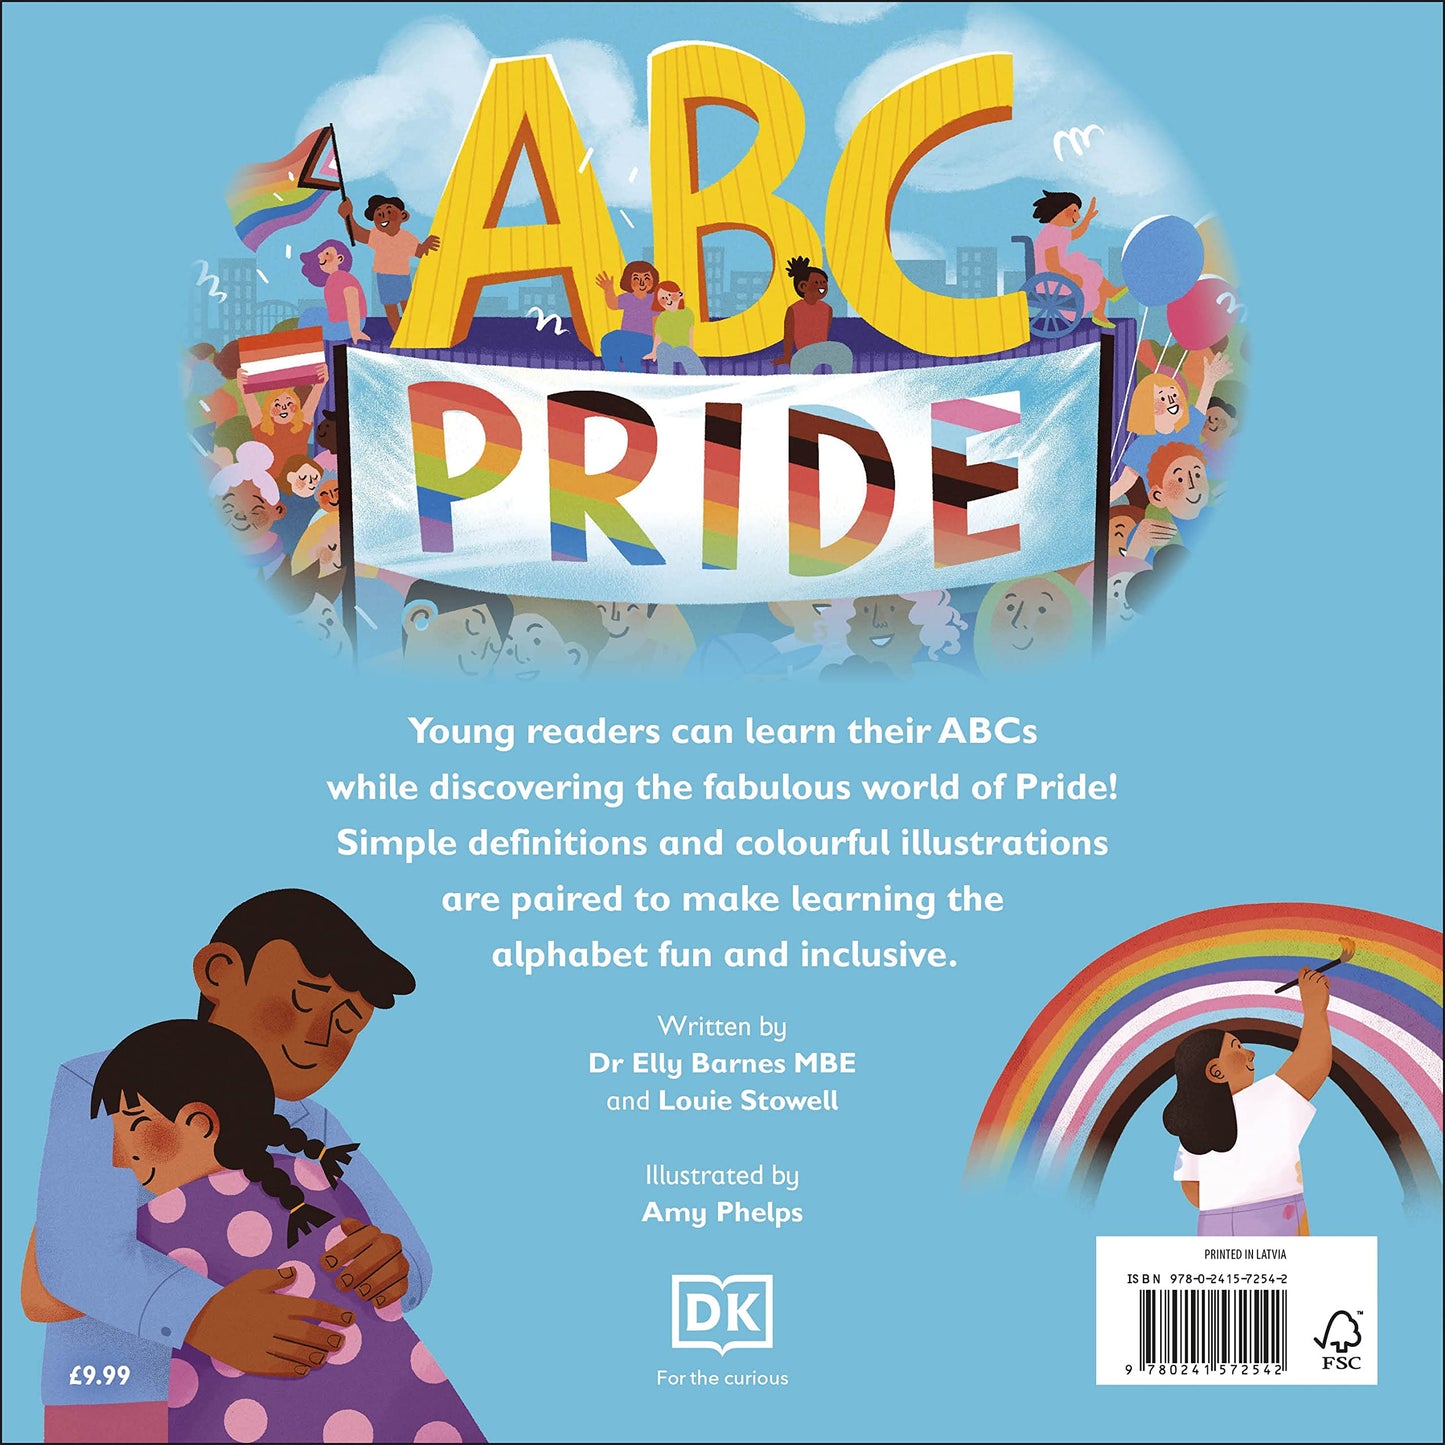 ABC Pride by Dr Elly Barnes MBE & Louie Stowell